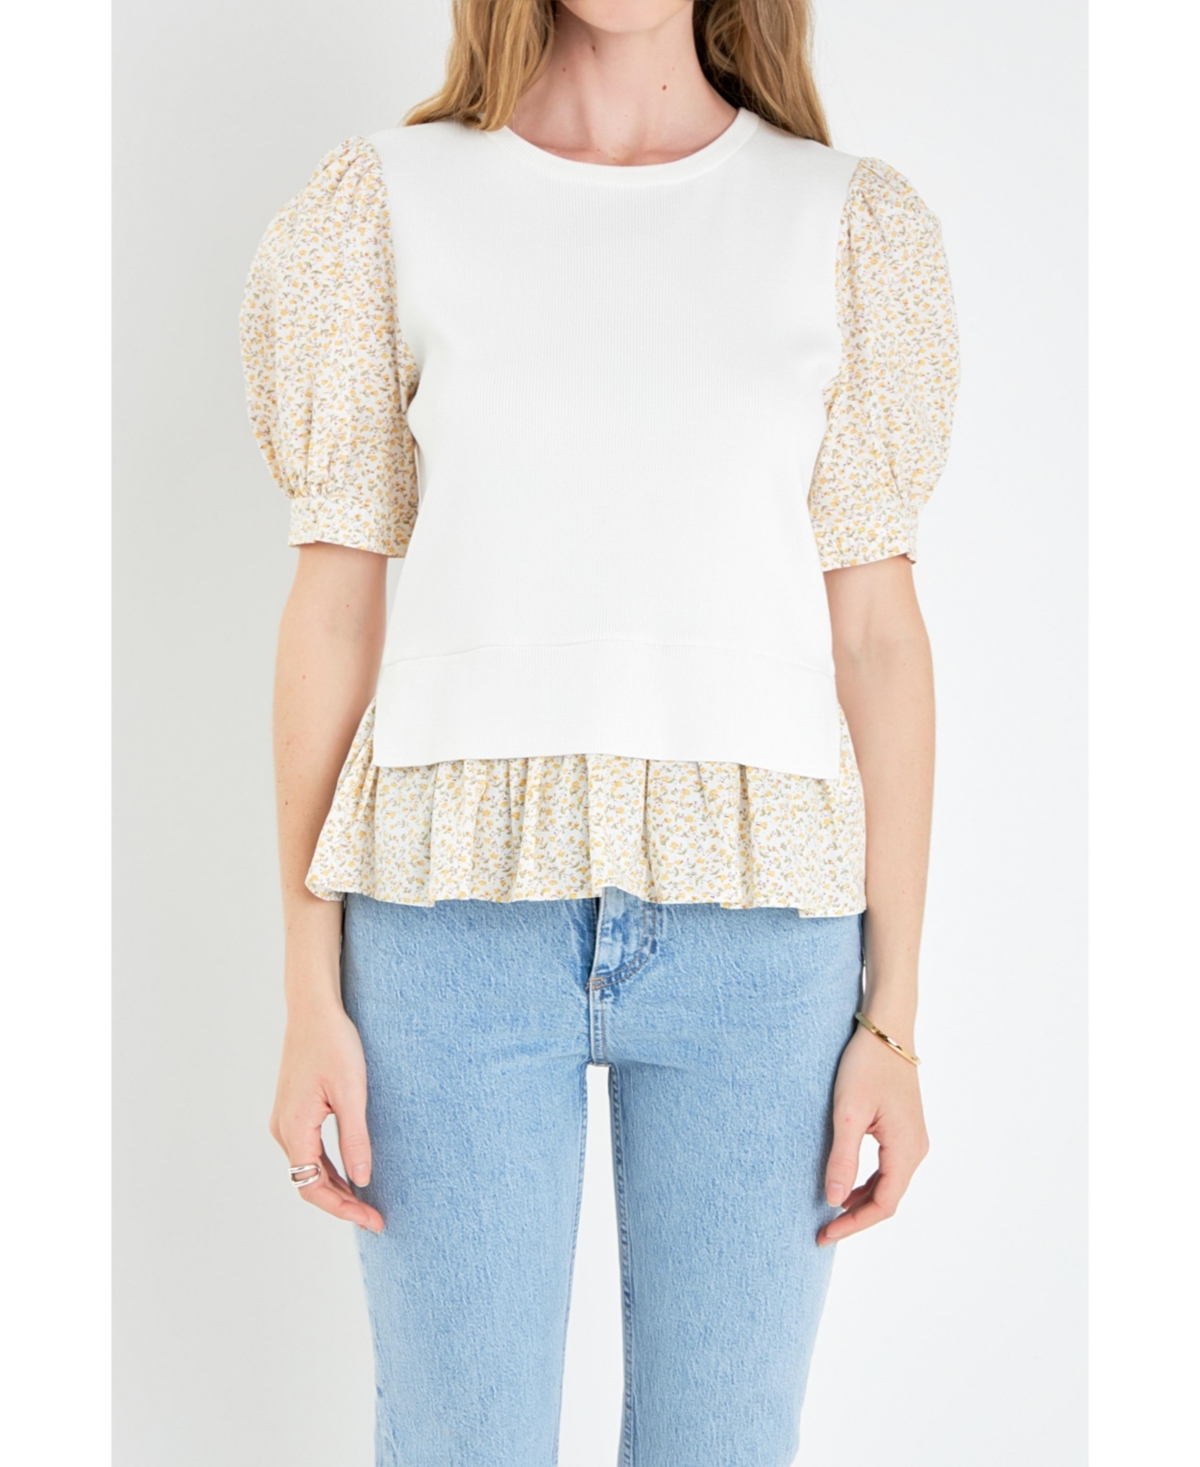 Women's Floral Mixed Media Top - Ivory